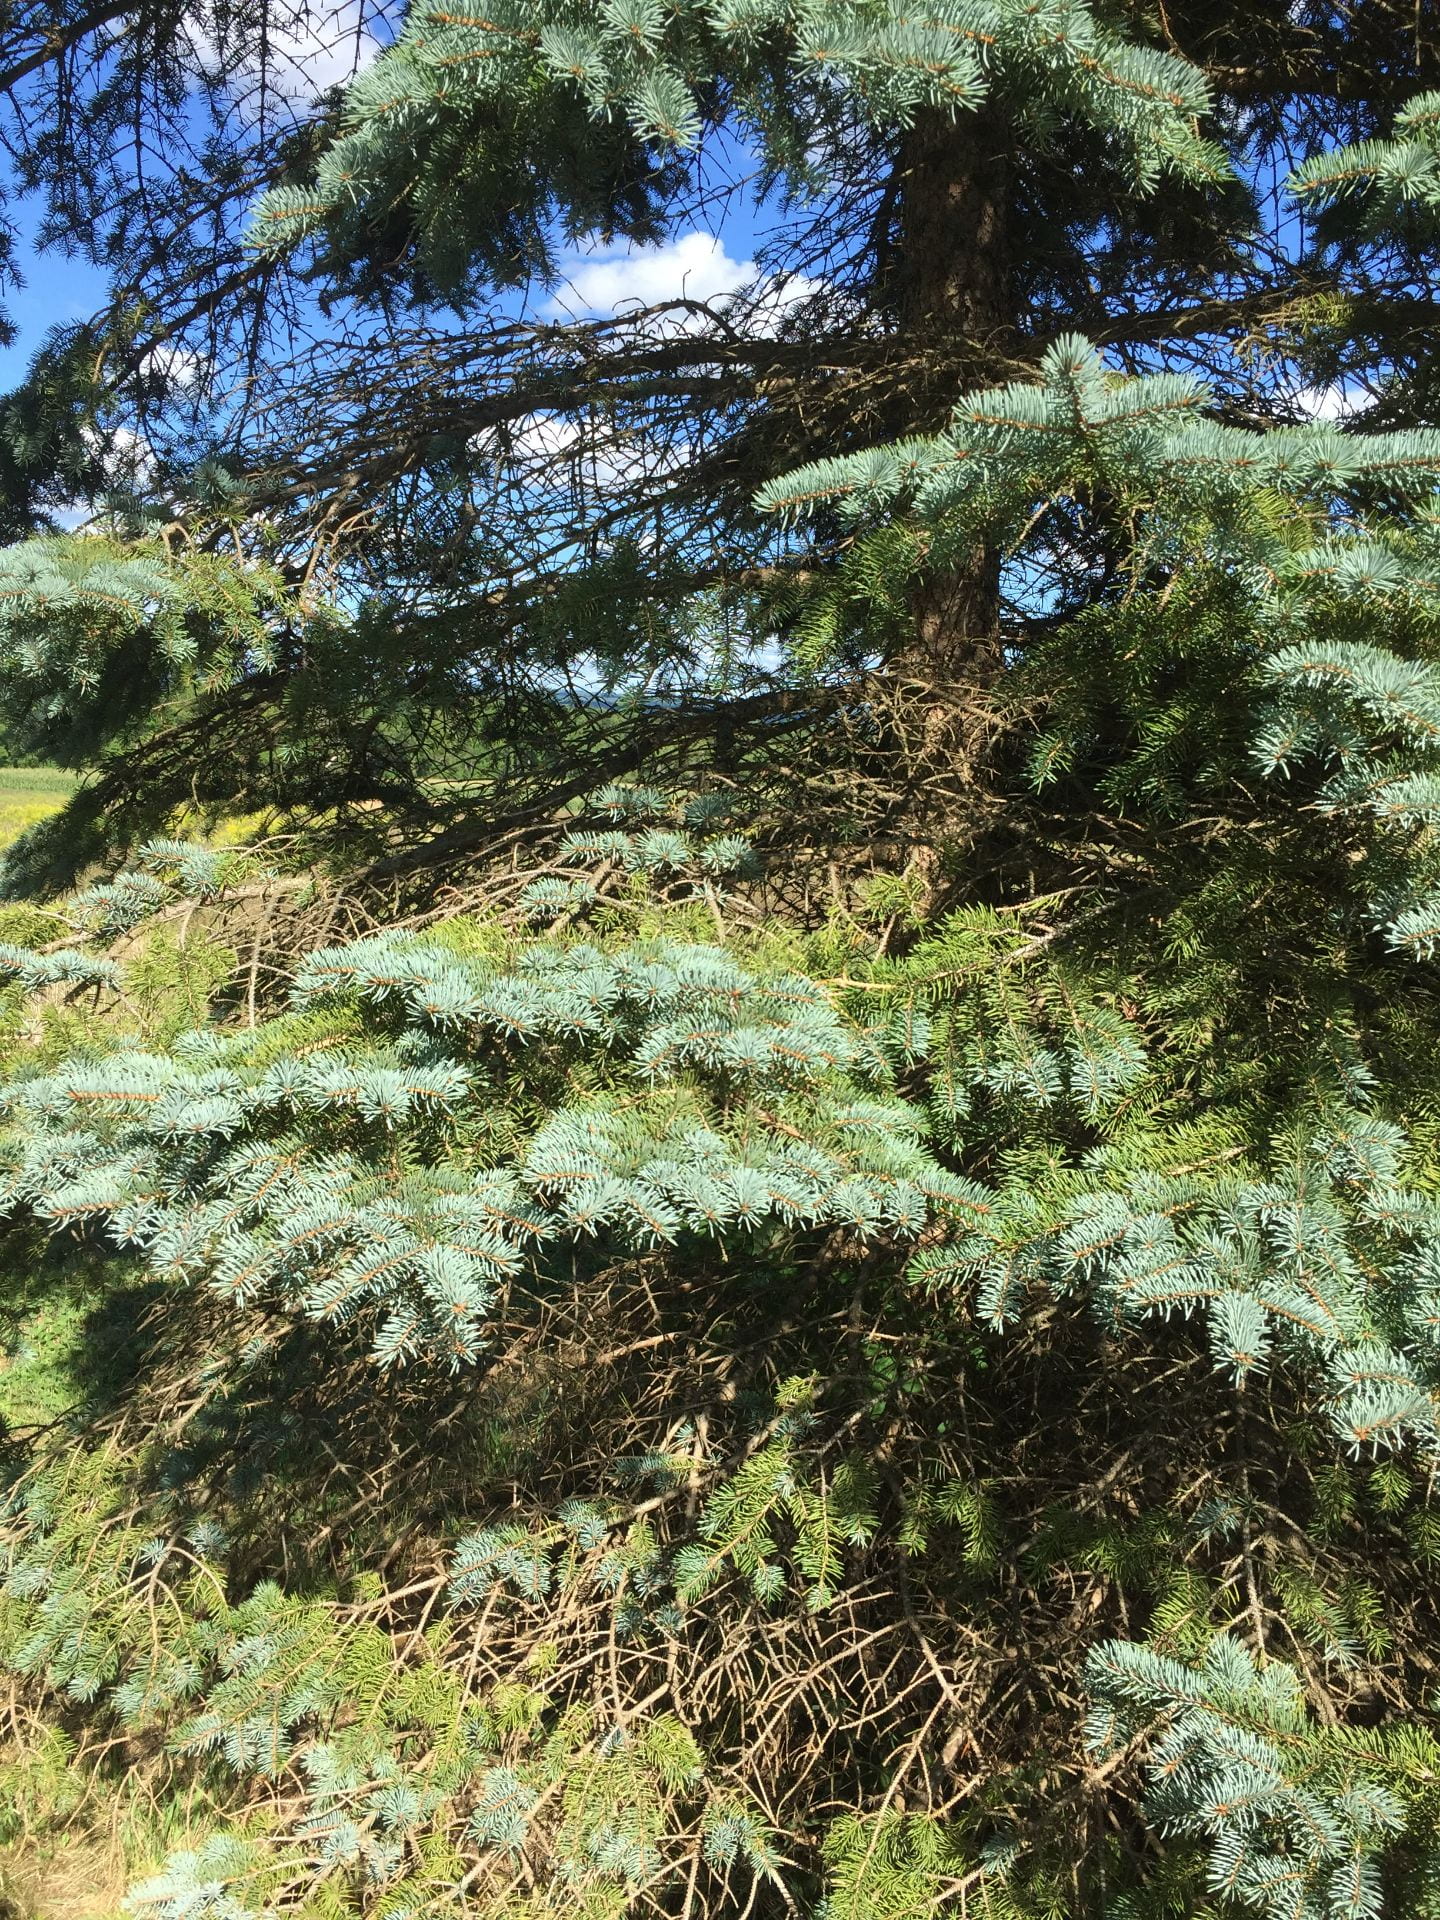 photo shows bare spots in blue spruce tree